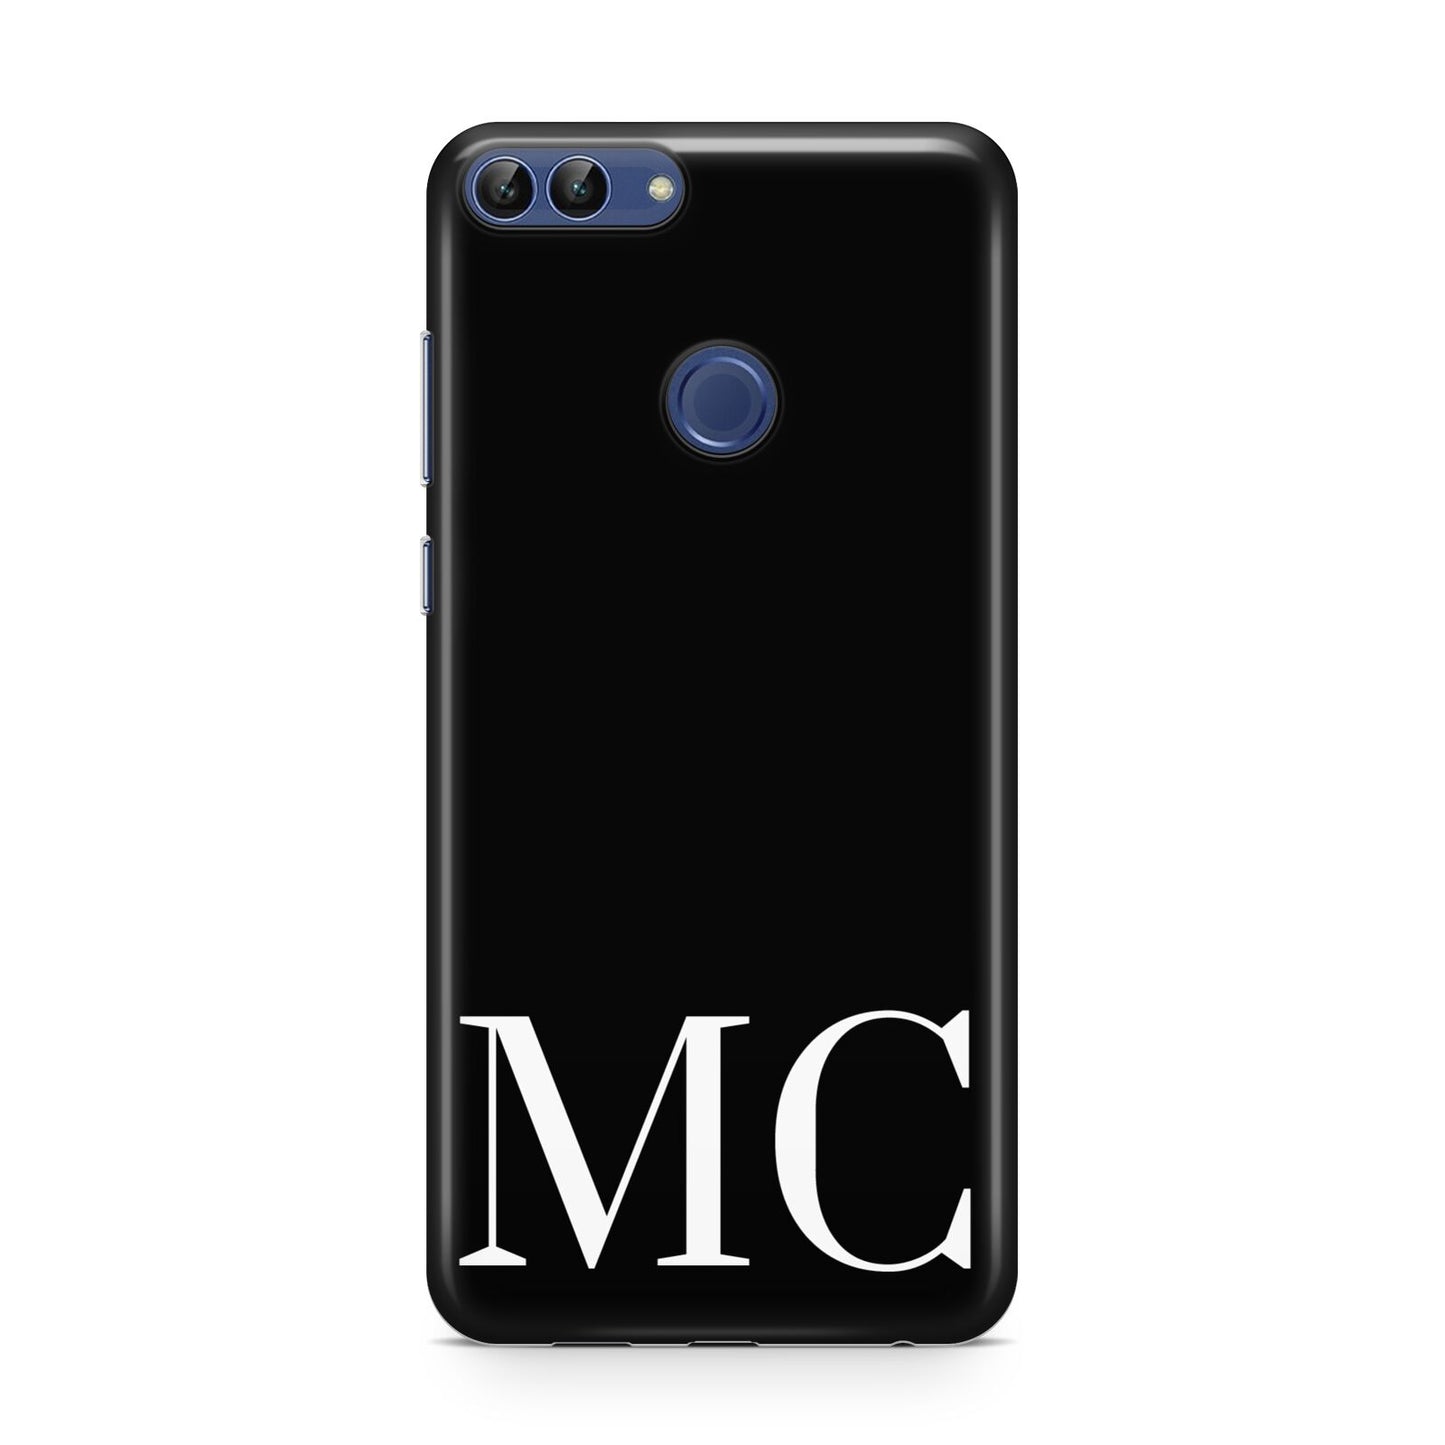 Initials Personalised 1 Huawei P Smart Case